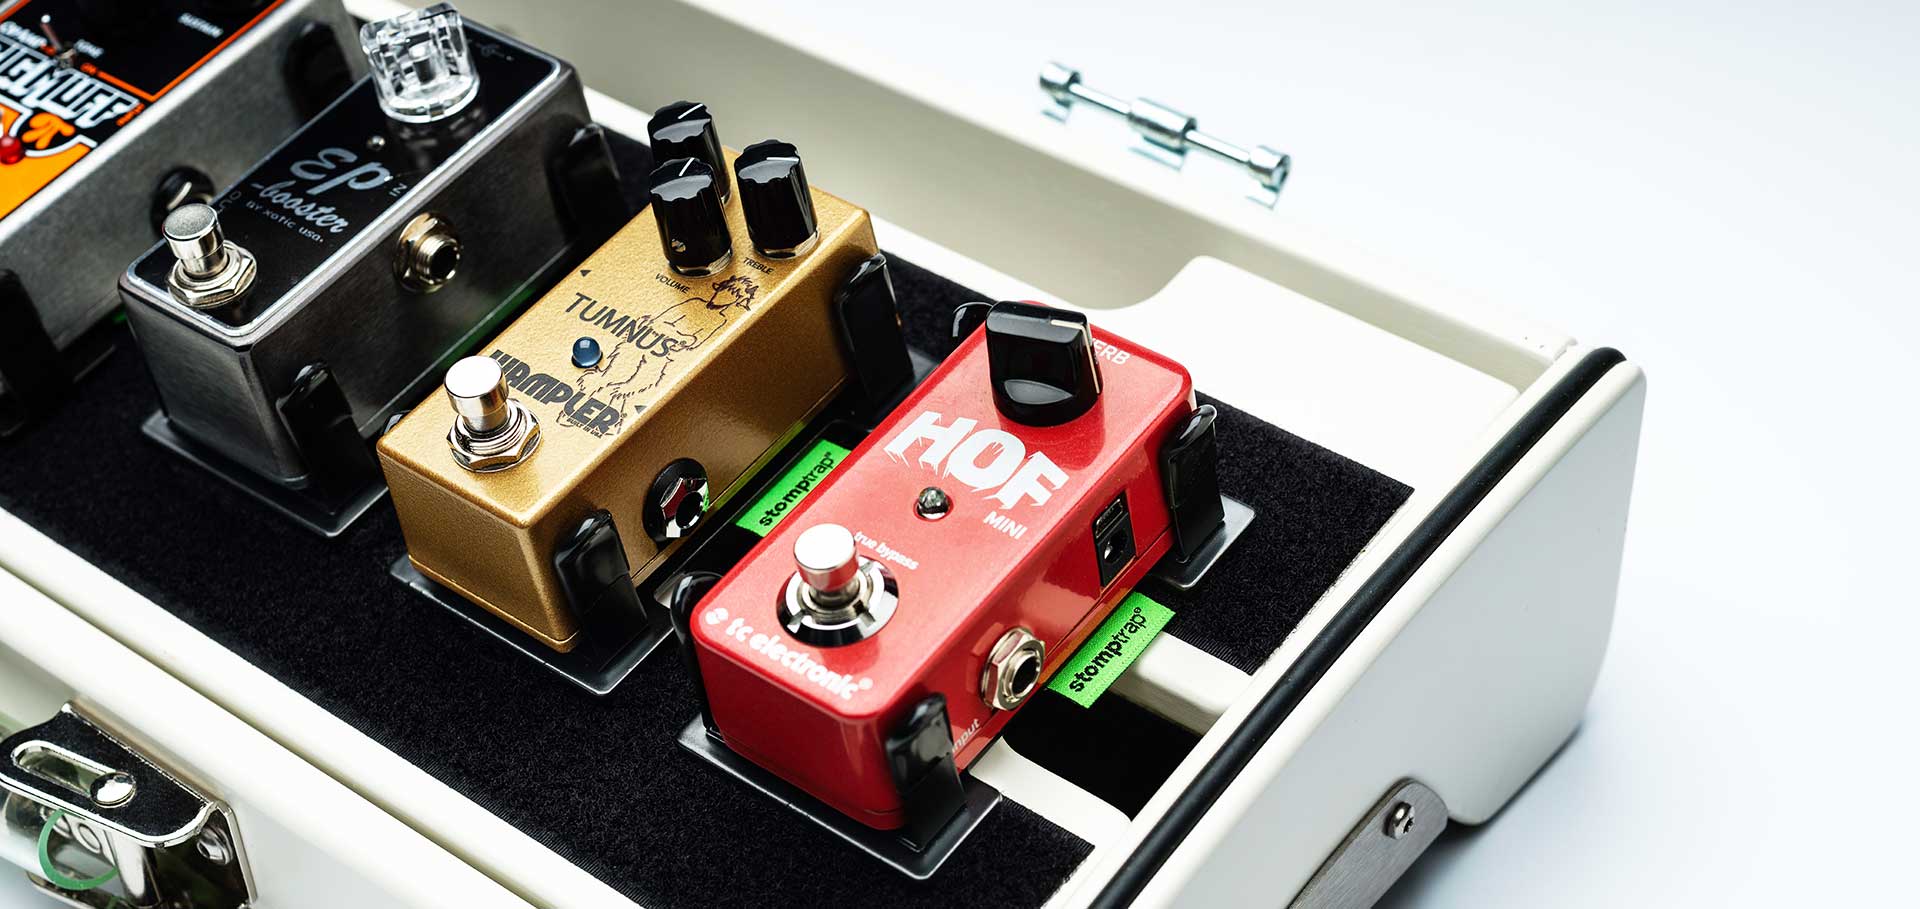 Fix pedals on pedalboard